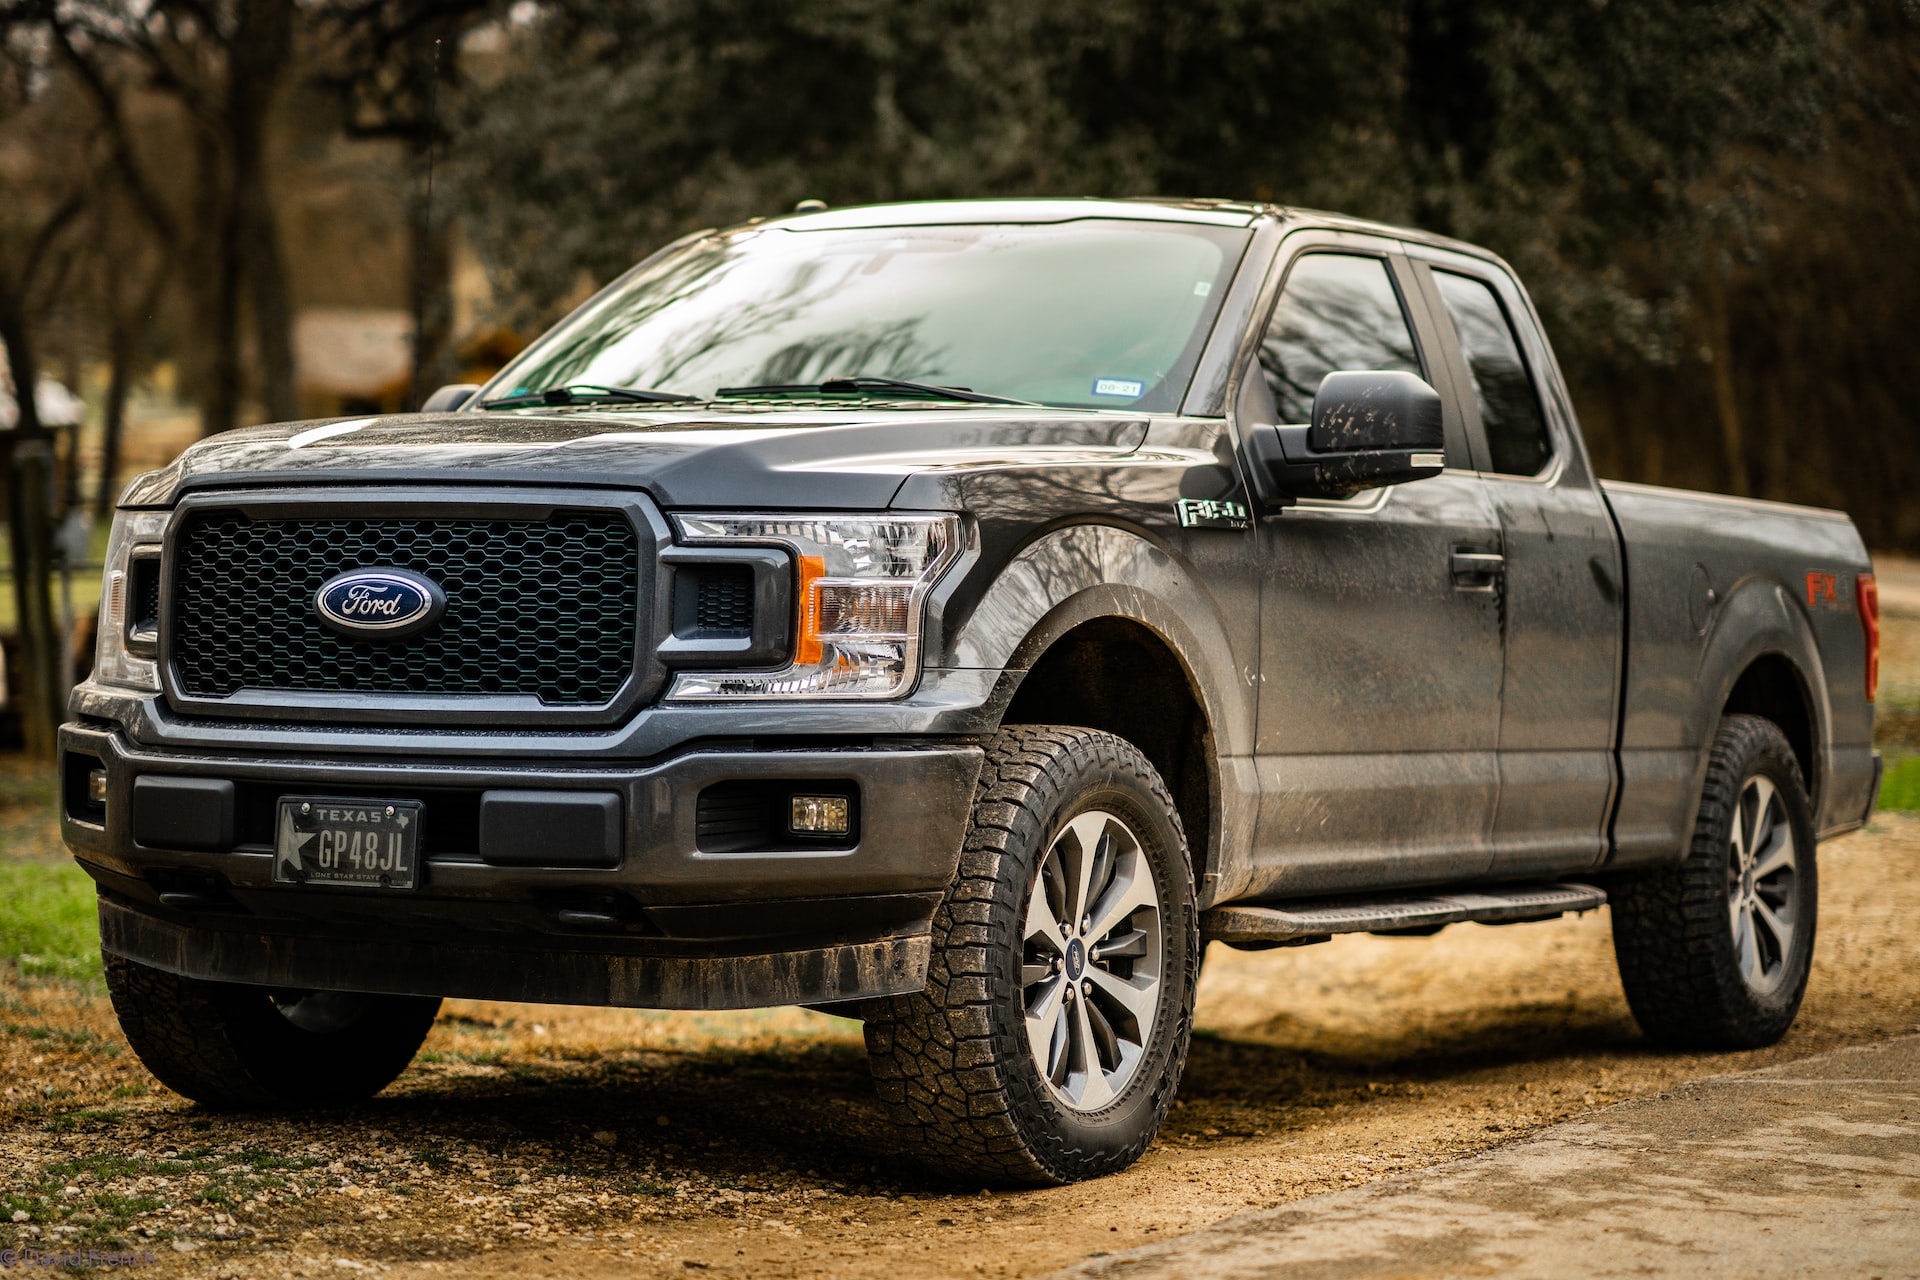 The Best And Worst Years for The Ford F-150